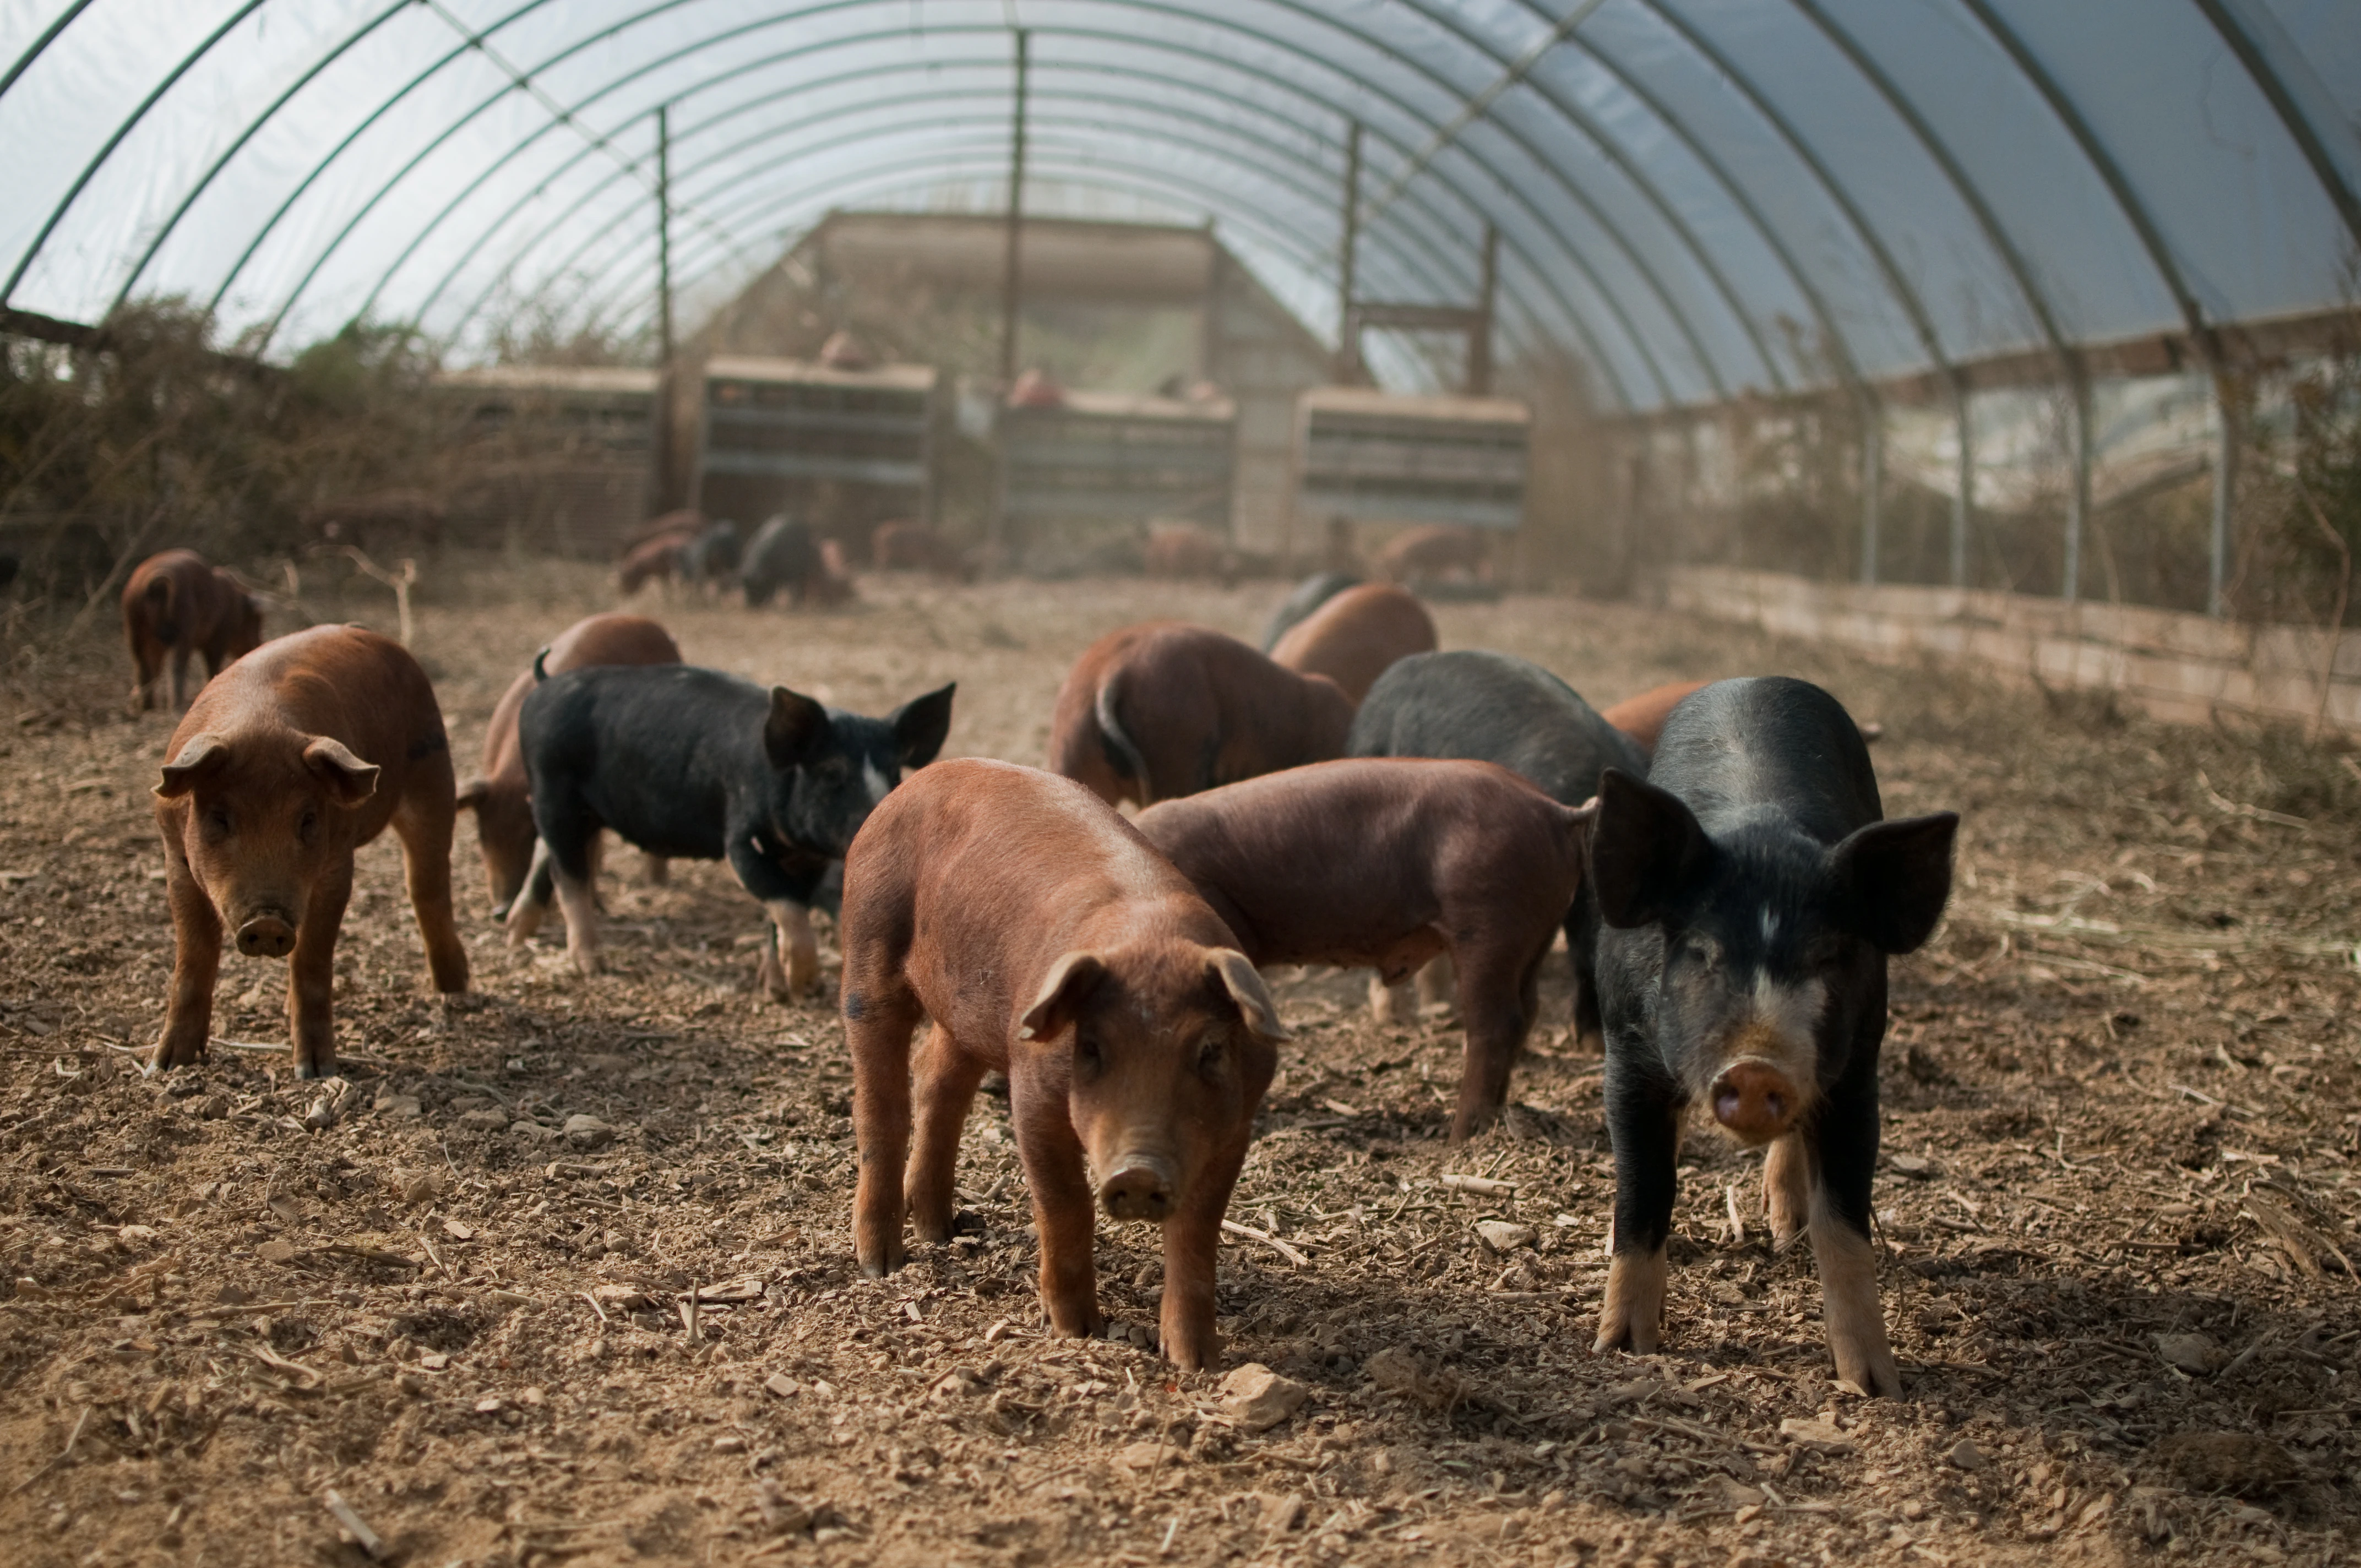 A group of brown and black pigs stand on dusty soil in an arched enclosure.